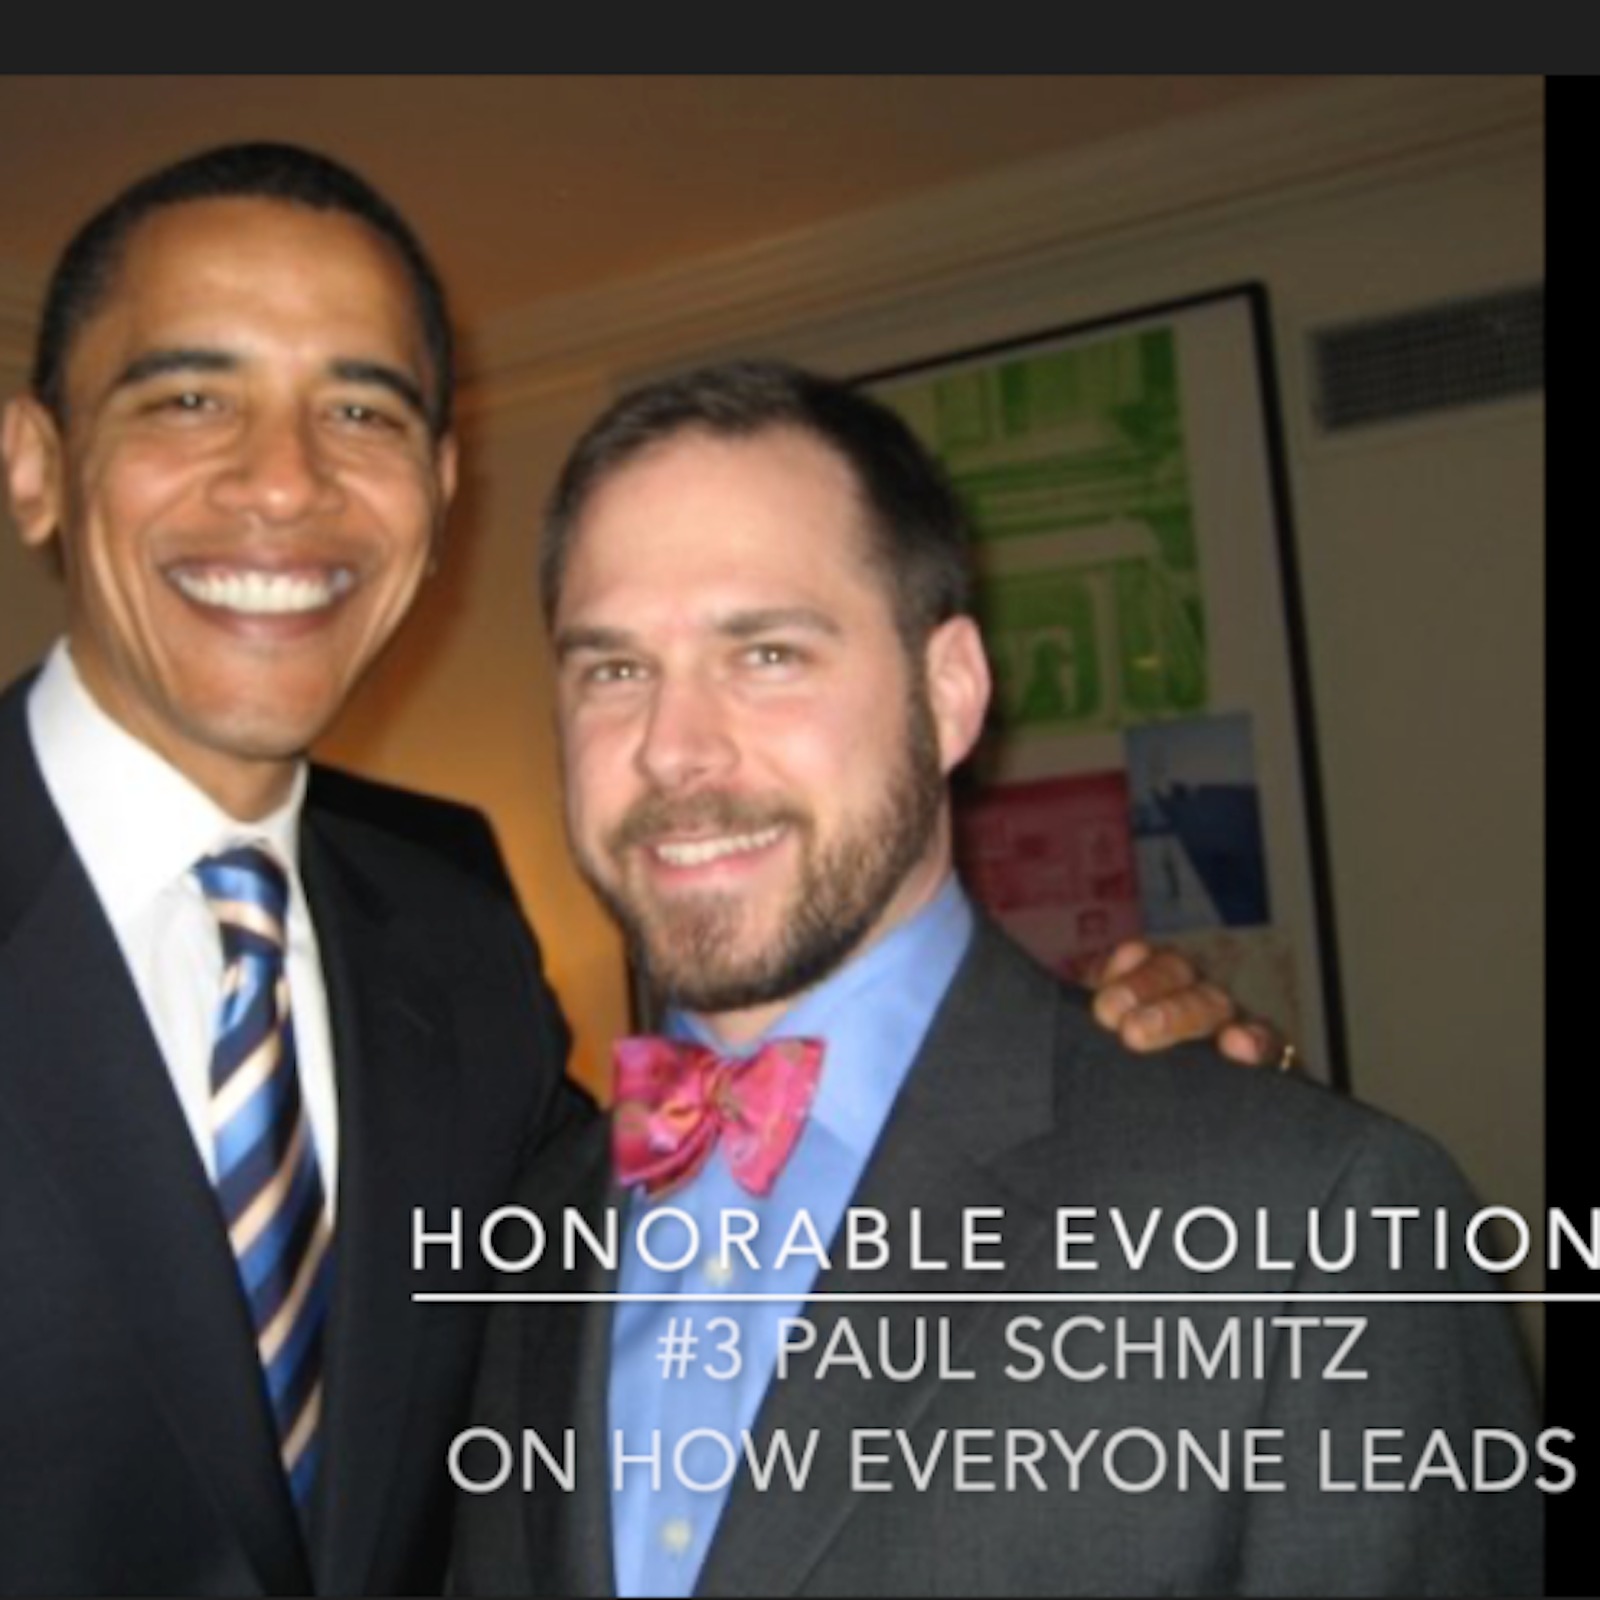 Honorable Evolution #4 Paul Schmitz - On How Everyone Leads